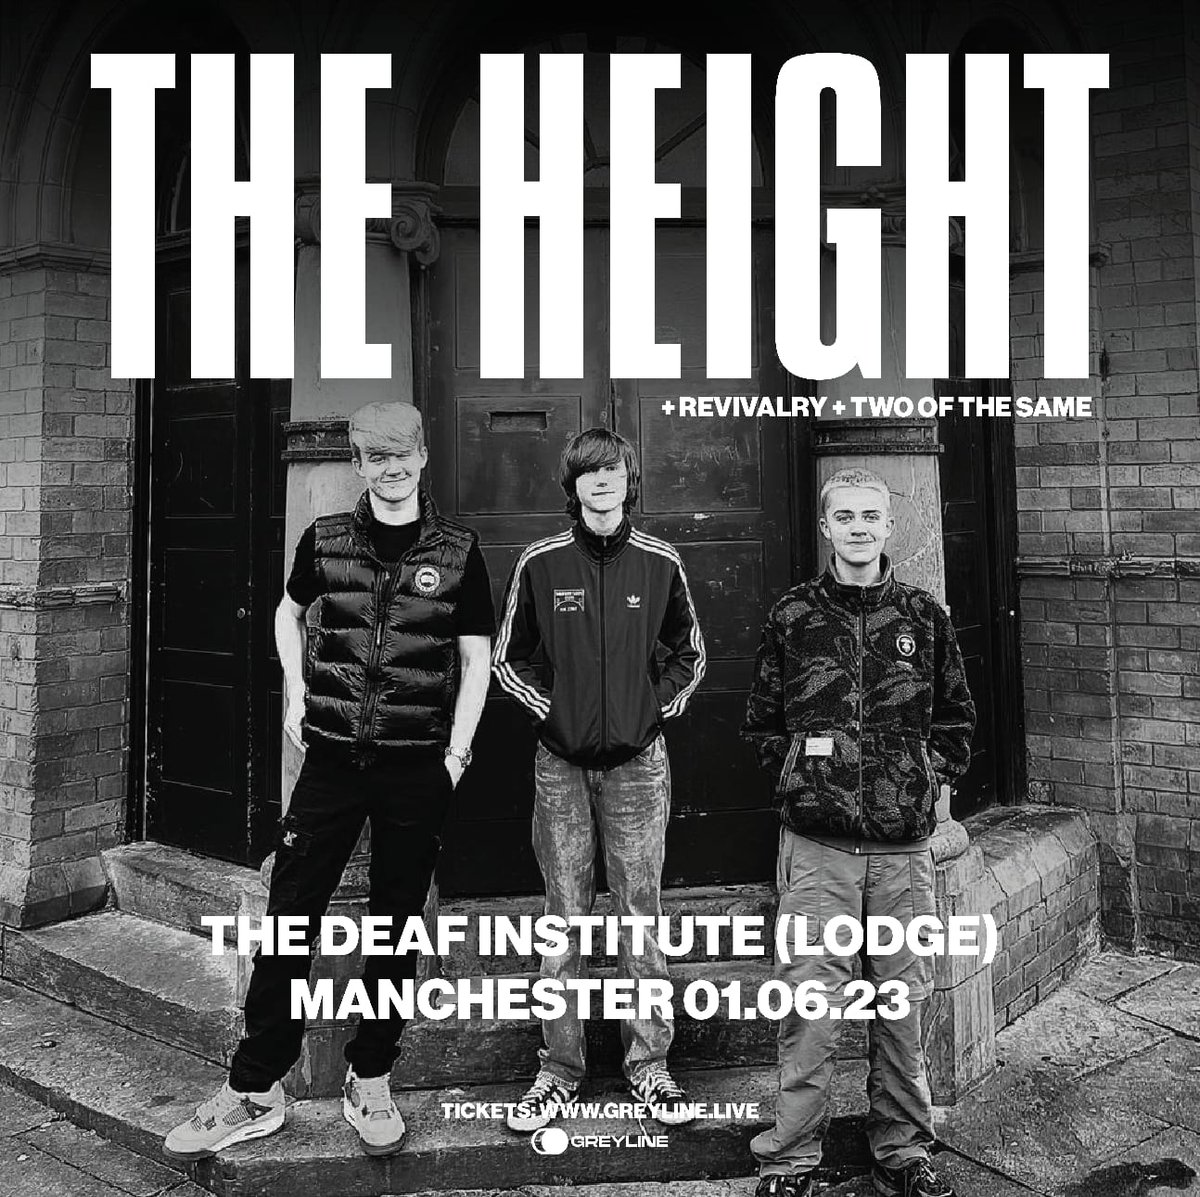 🎵🎵 GIG ANNOUNCEMENT 🎵 🎵 BOSH!! We get to play the legendary @DeafInstitute BOSH!! We get to do it with our good friends, the awesome @TheHeightBand and Two Of The Same Thank you @greylinelive 🔥🔥🔥 #SYDTF